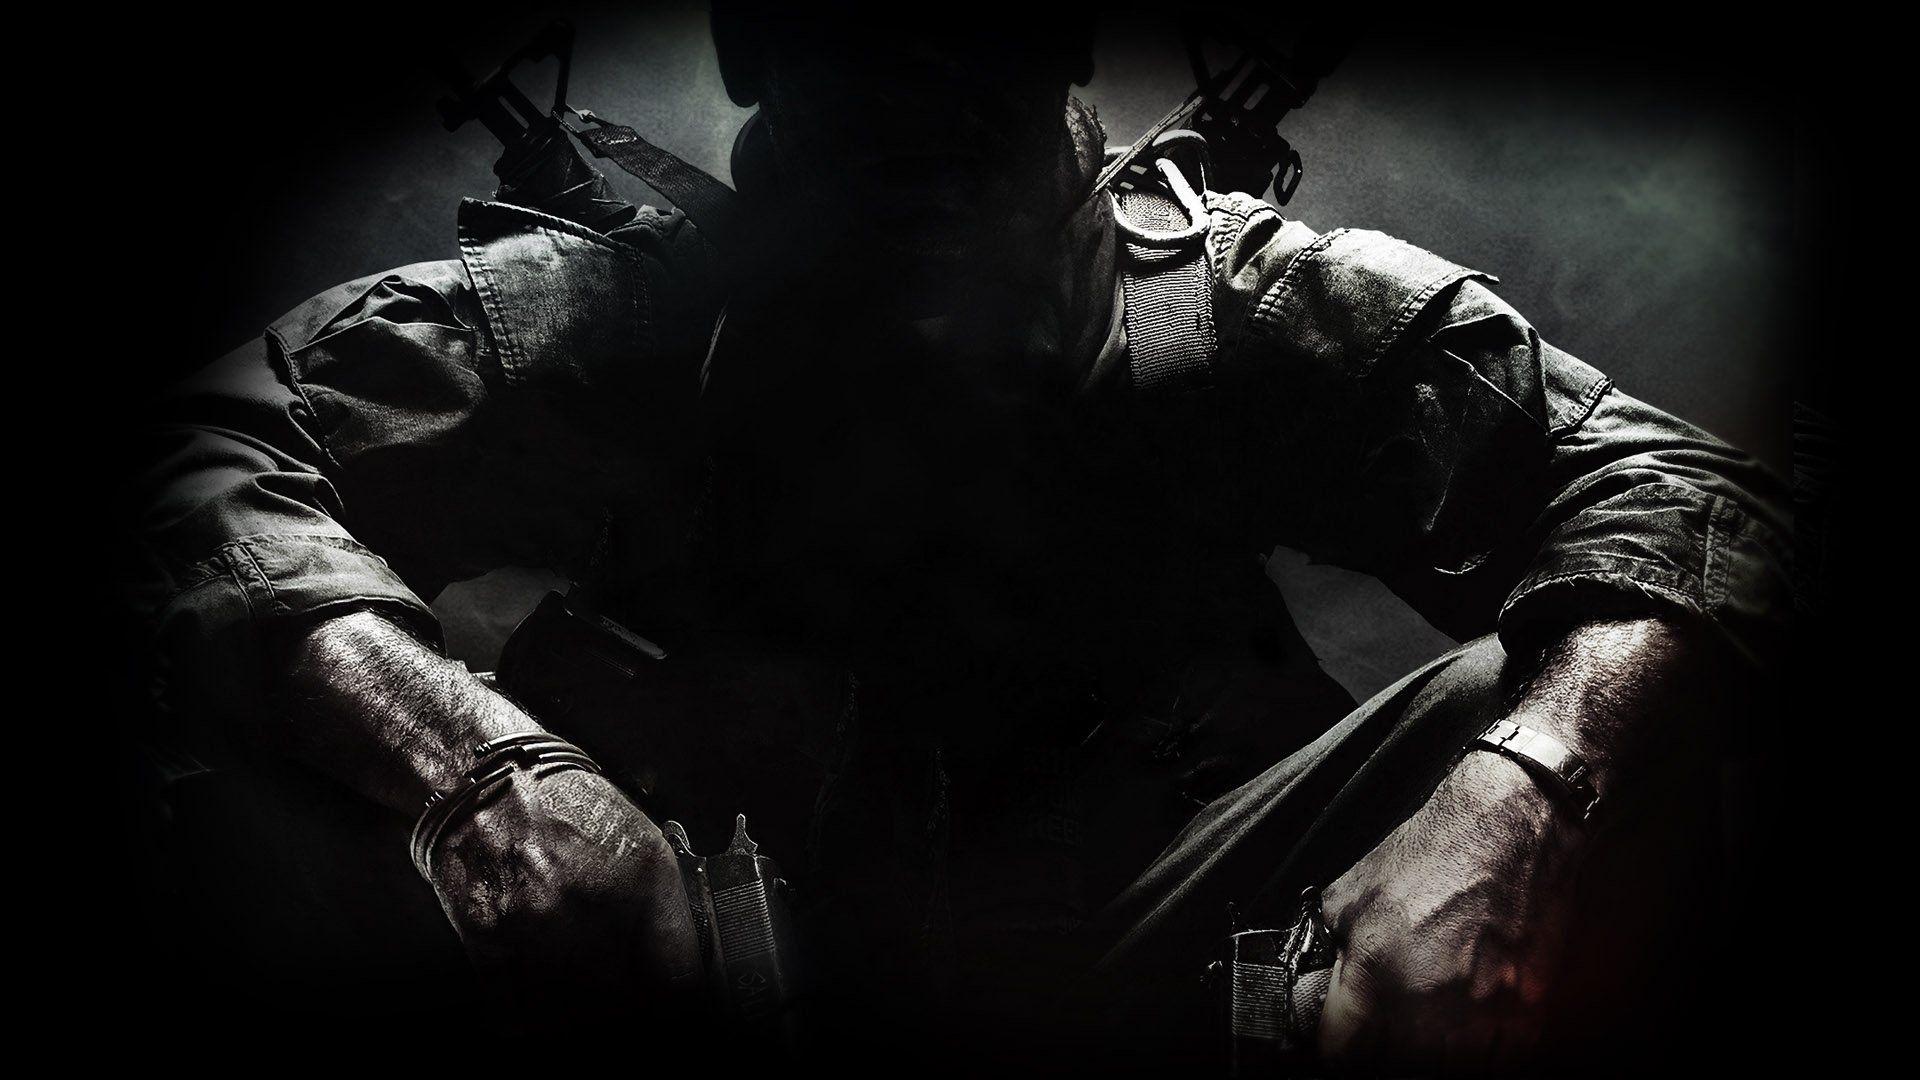 Call Of Duty Black Ops Wallpaper 1080p 261645